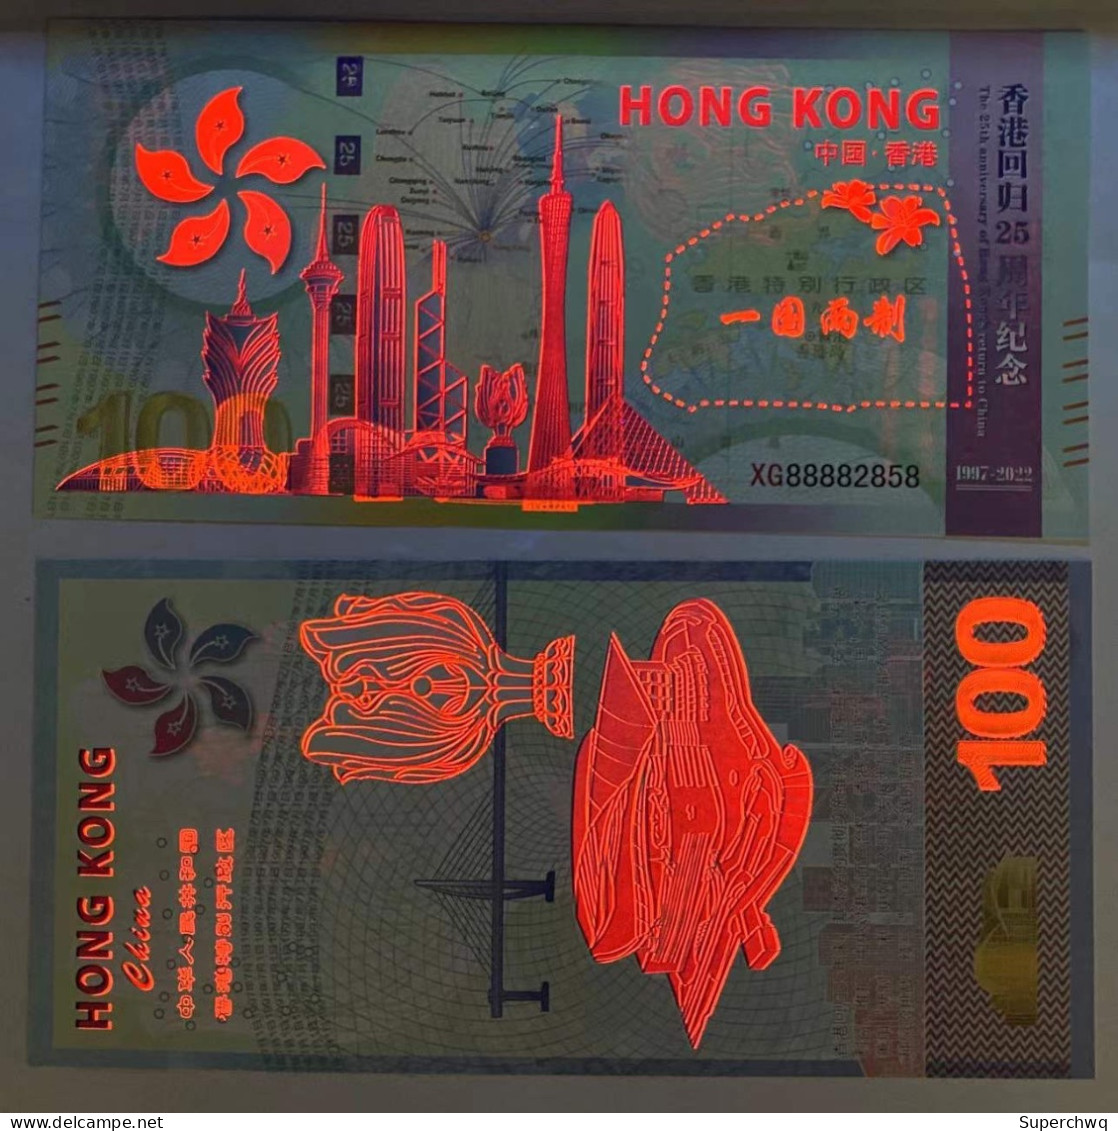 Banknote Collection，Fluorescent Banknotes For The 25th Anniversary Commemorative Voucher Of Hong Kong's Return To China - Swaziland